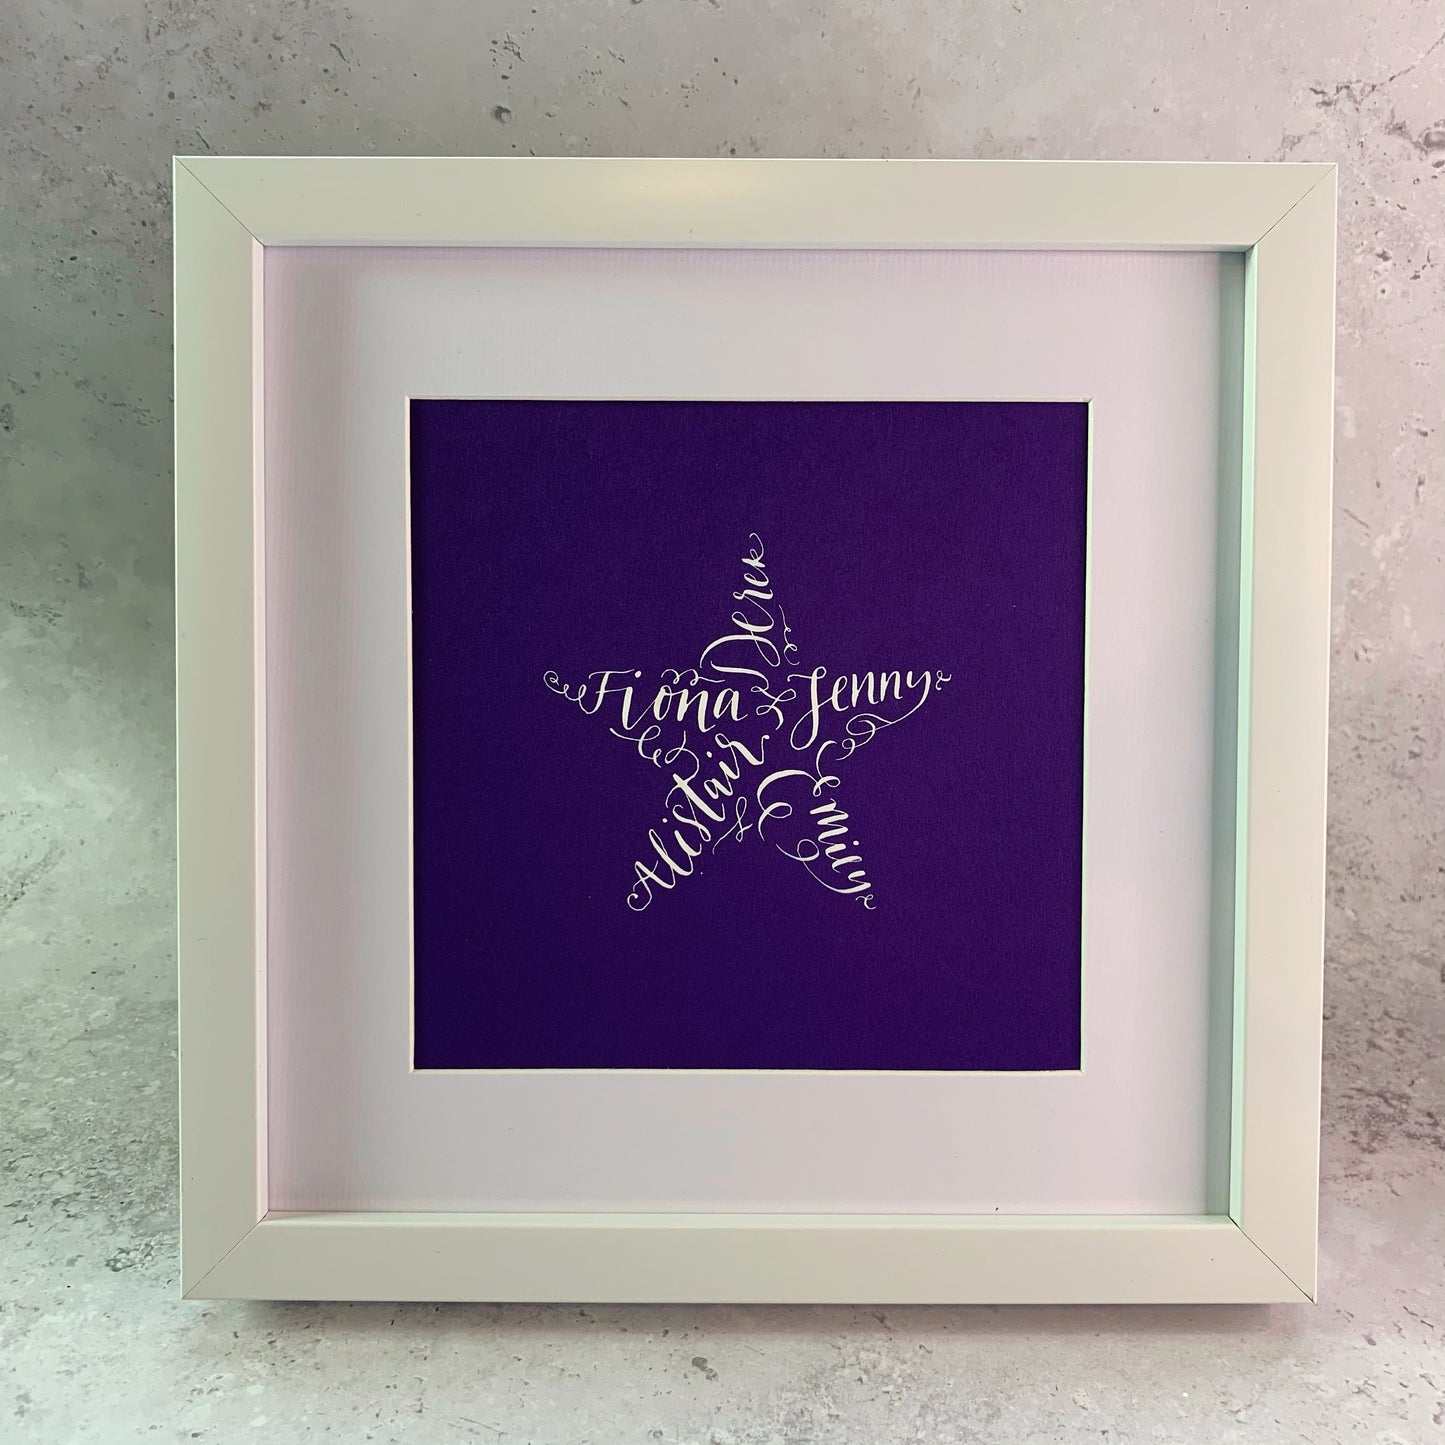 white square frame with white mount, purple card with white ink calligraphy names making star shape